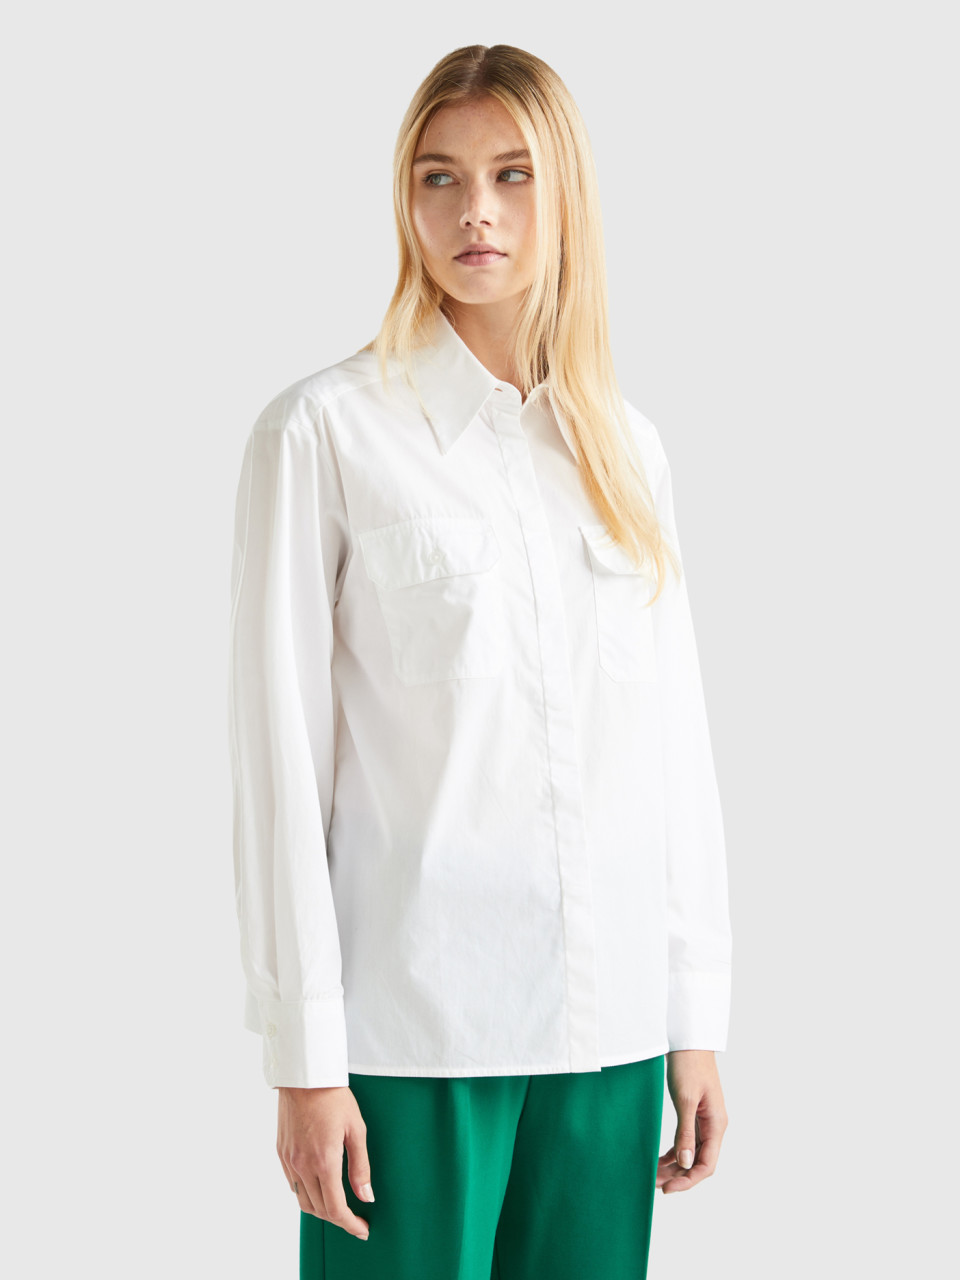 Benetton, Shirt With Pockets And Slits, White, Women